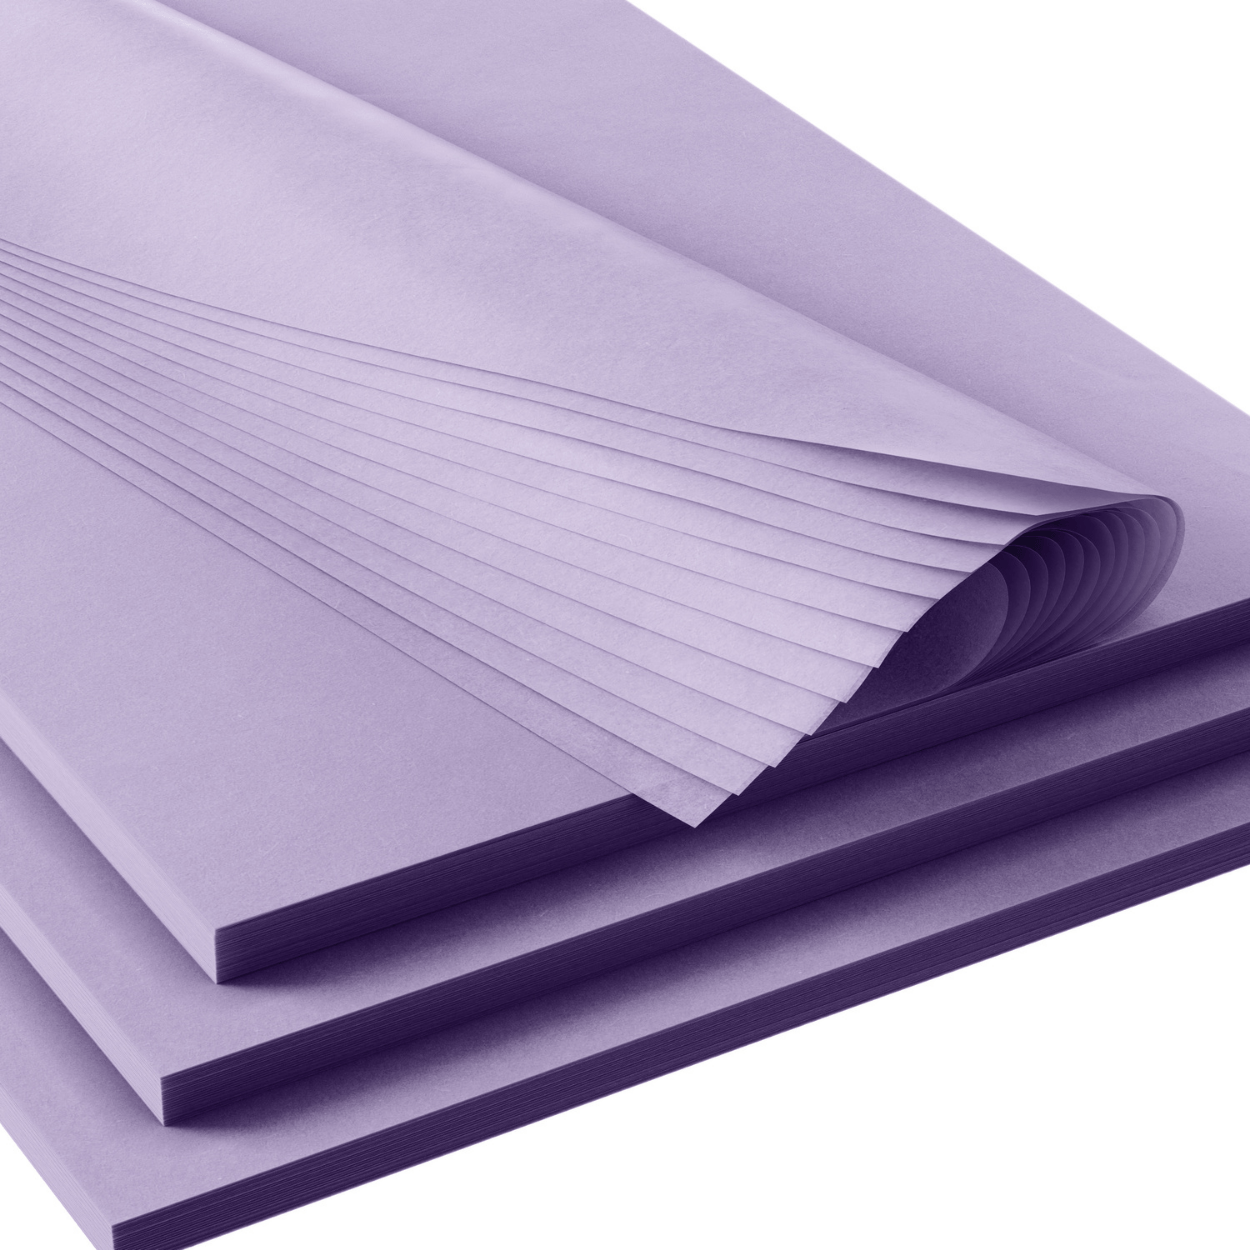 Lilac (Purple) Color Tissue Paper 20 x 30 24 Sheets / Pack